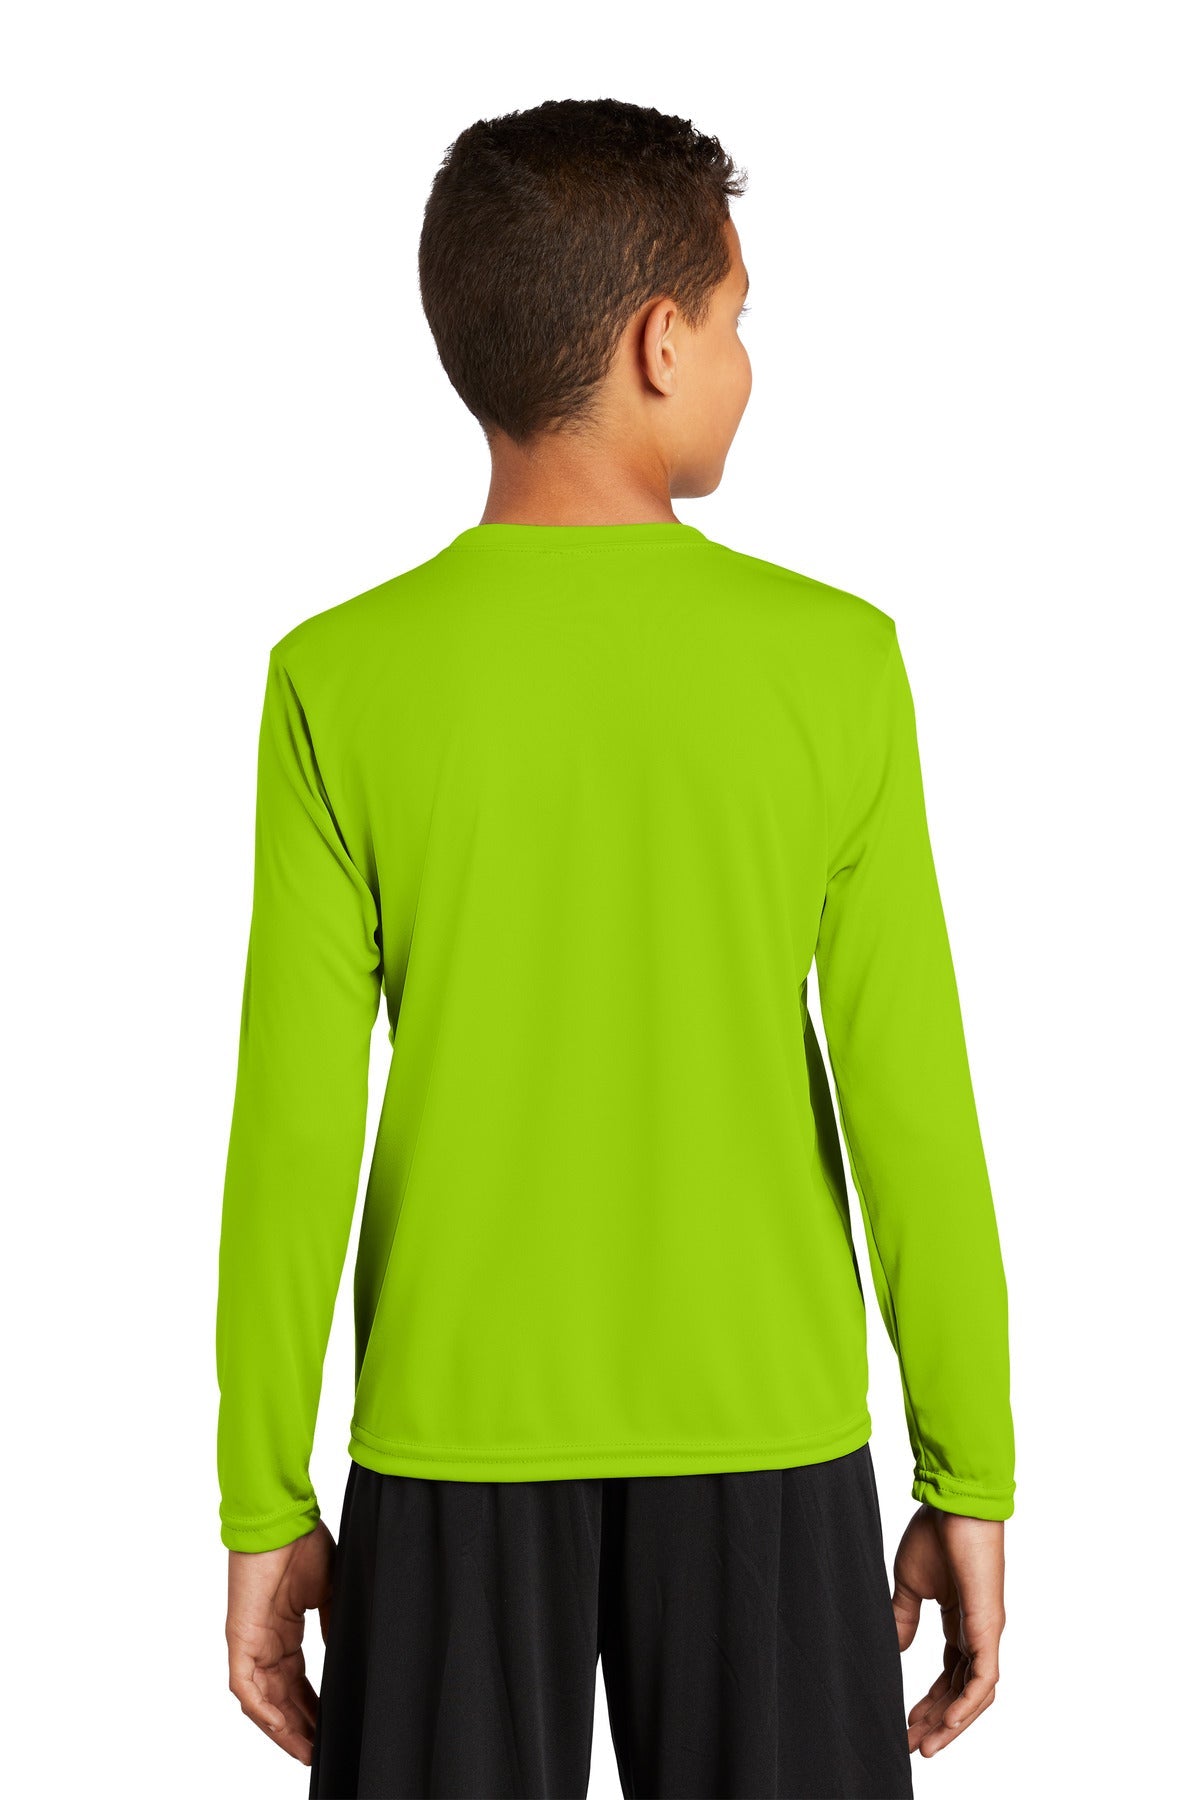 Sport-Tek® Youth Long Sleeve PosiCharge® Competitor™ Tee. YST350LS [Lime Shock] - DFW Impression